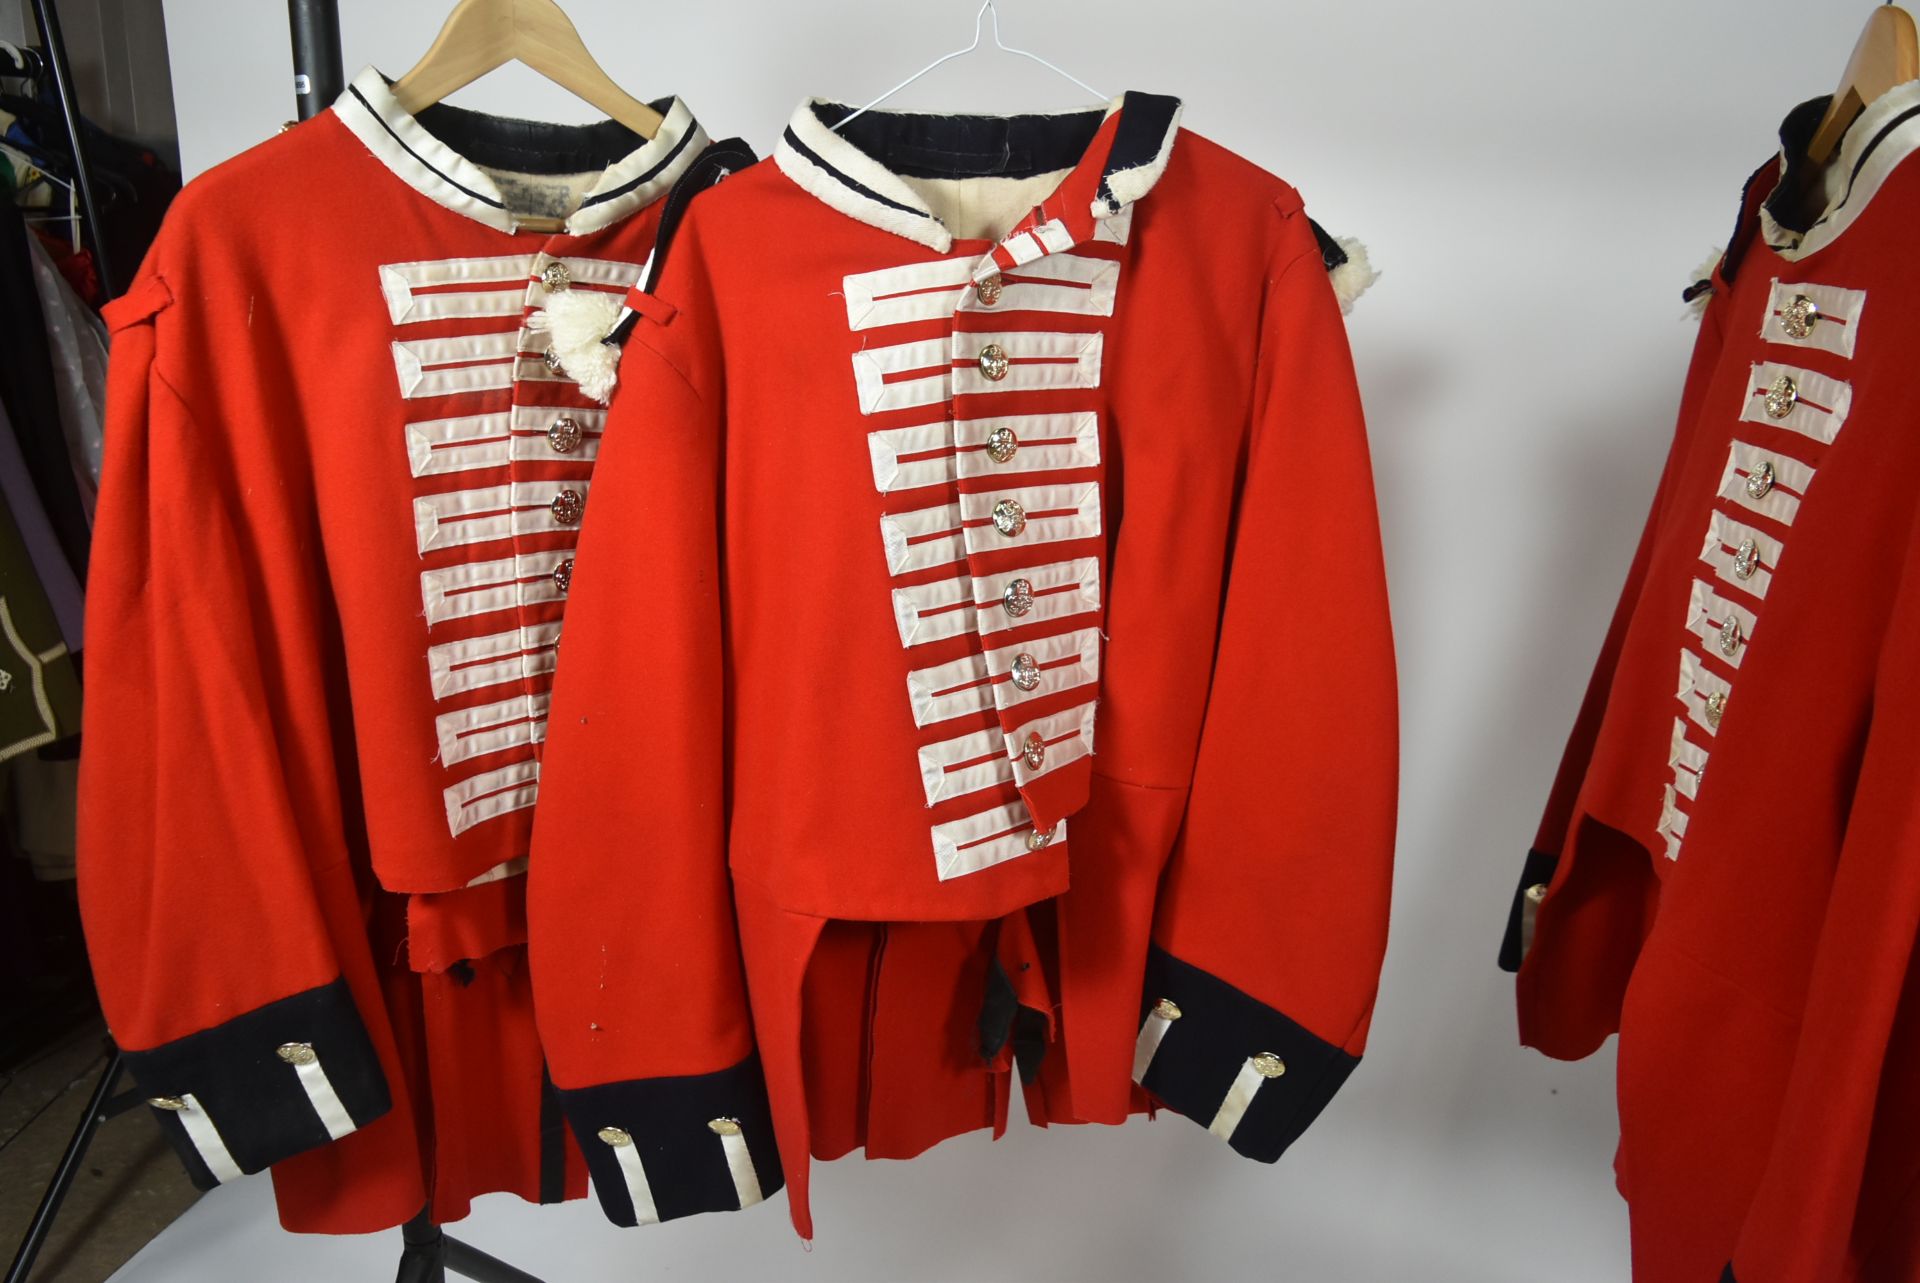 CORPS OF INVALIDS (CHELSEA PENSIONERS) NAPOLEONIC STYLE REPRODUCTION UNIFORM - Image 3 of 5